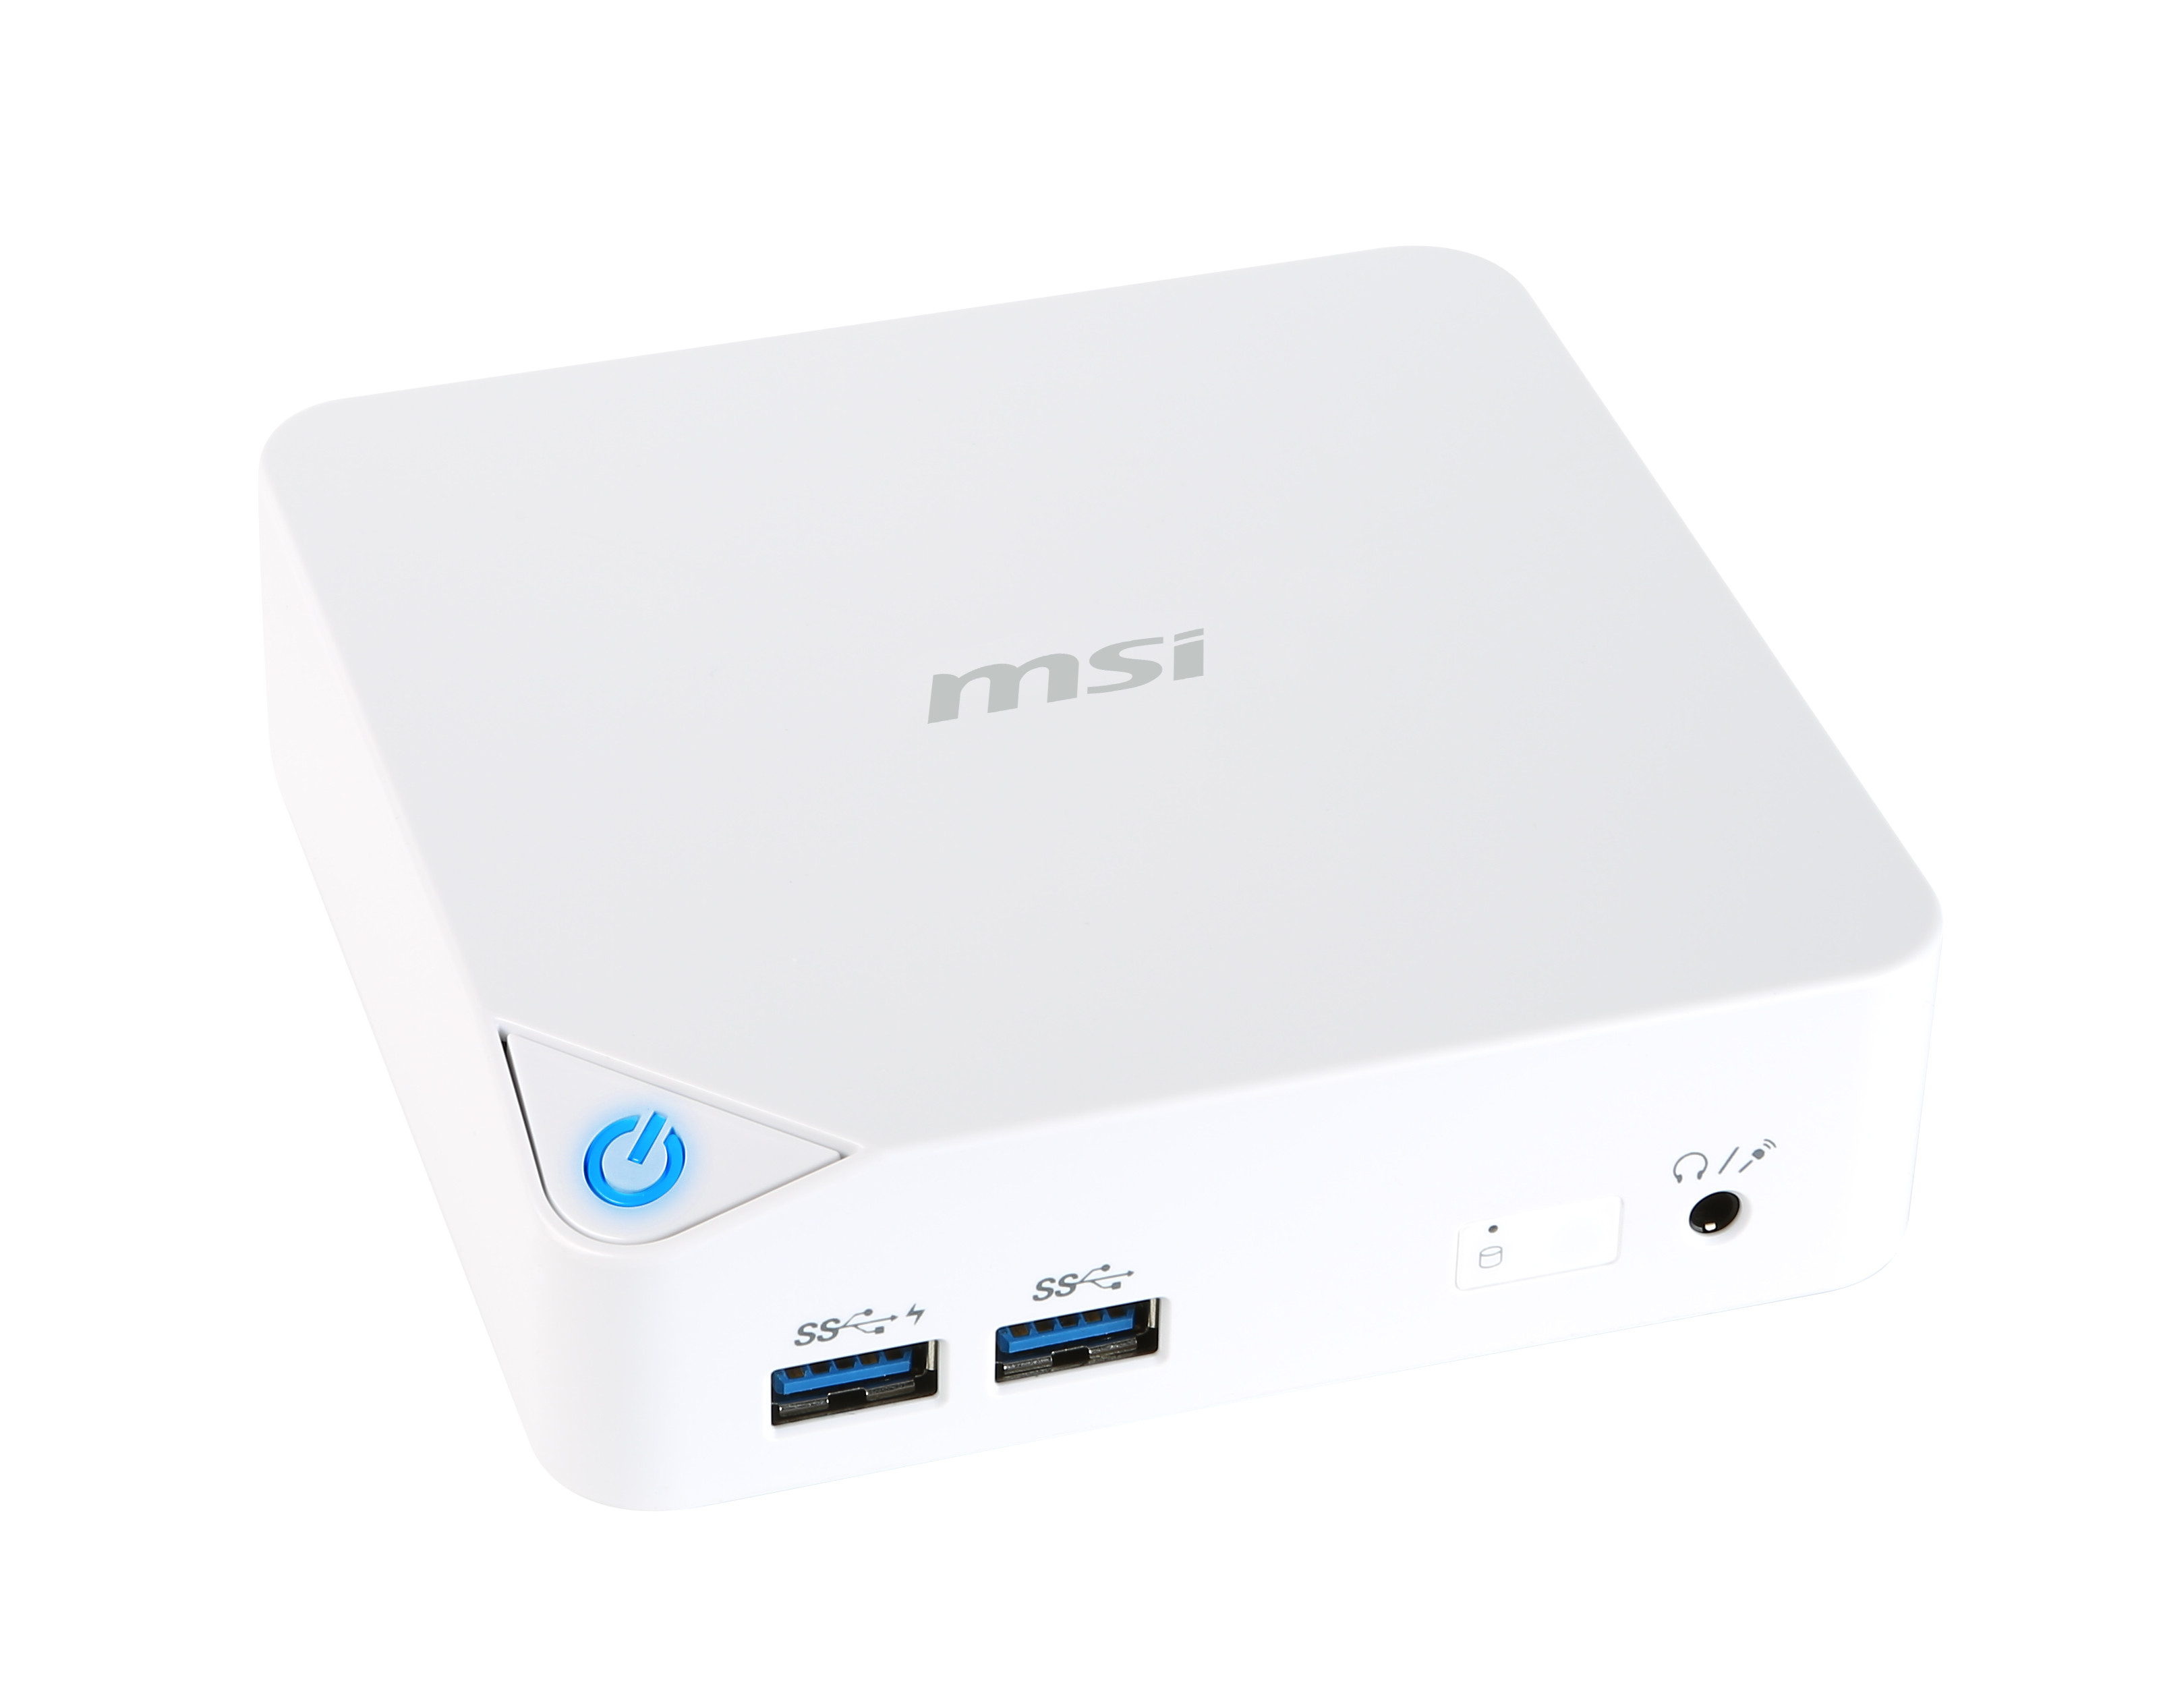 msi cubi product pictures 3d12